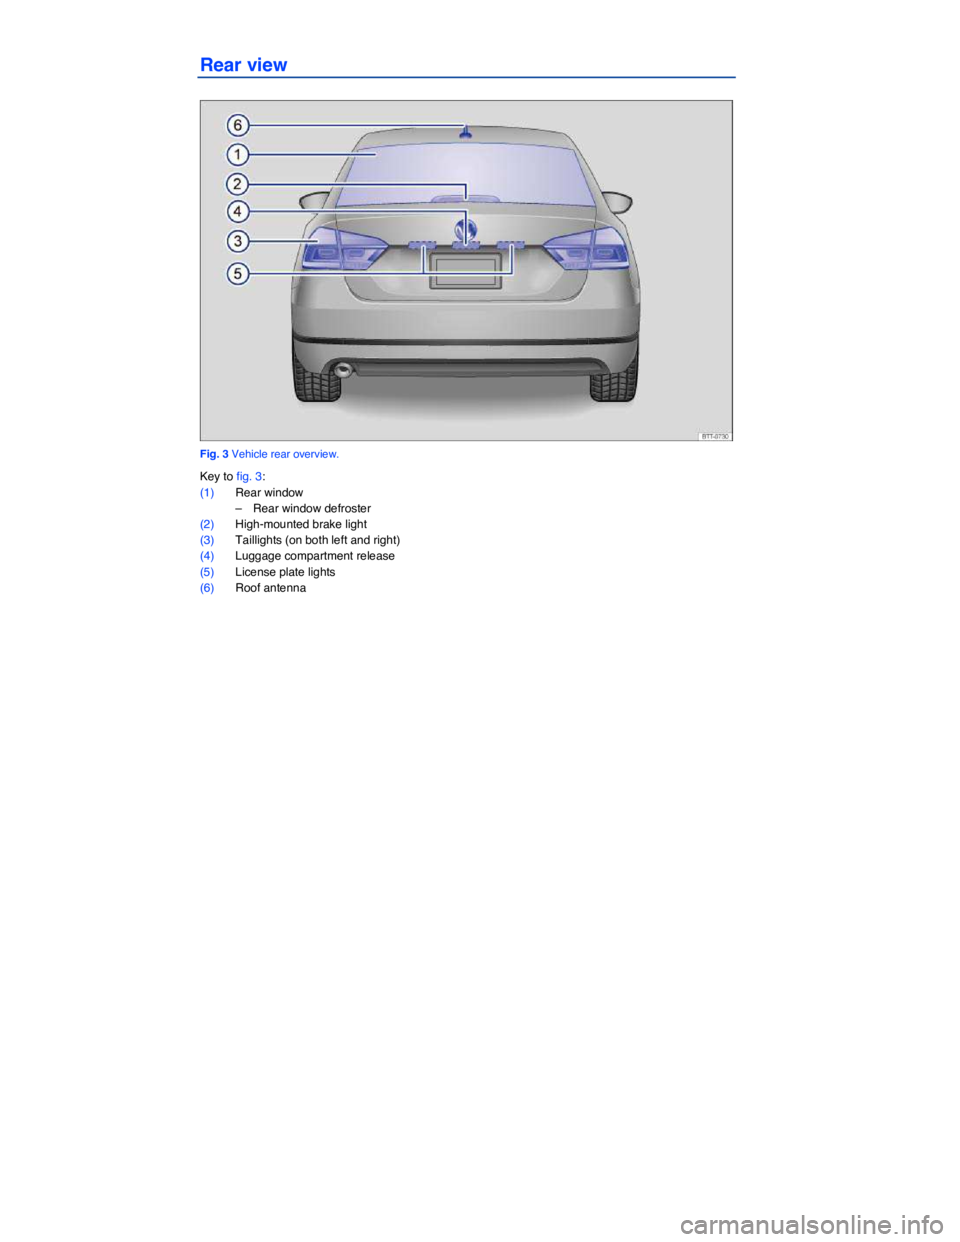 VOLKSWAGEN PASSAT 2013  Owners Manual  
Rear view 
 
Fig. 3 Vehicle rear overview. 
Key to fig. 3: 
(1) Rear window 
–  Rear window defroster  
(2) High-mounted brake light 
(3) Taillights (on both left and right)  
(4) Luggage compartm